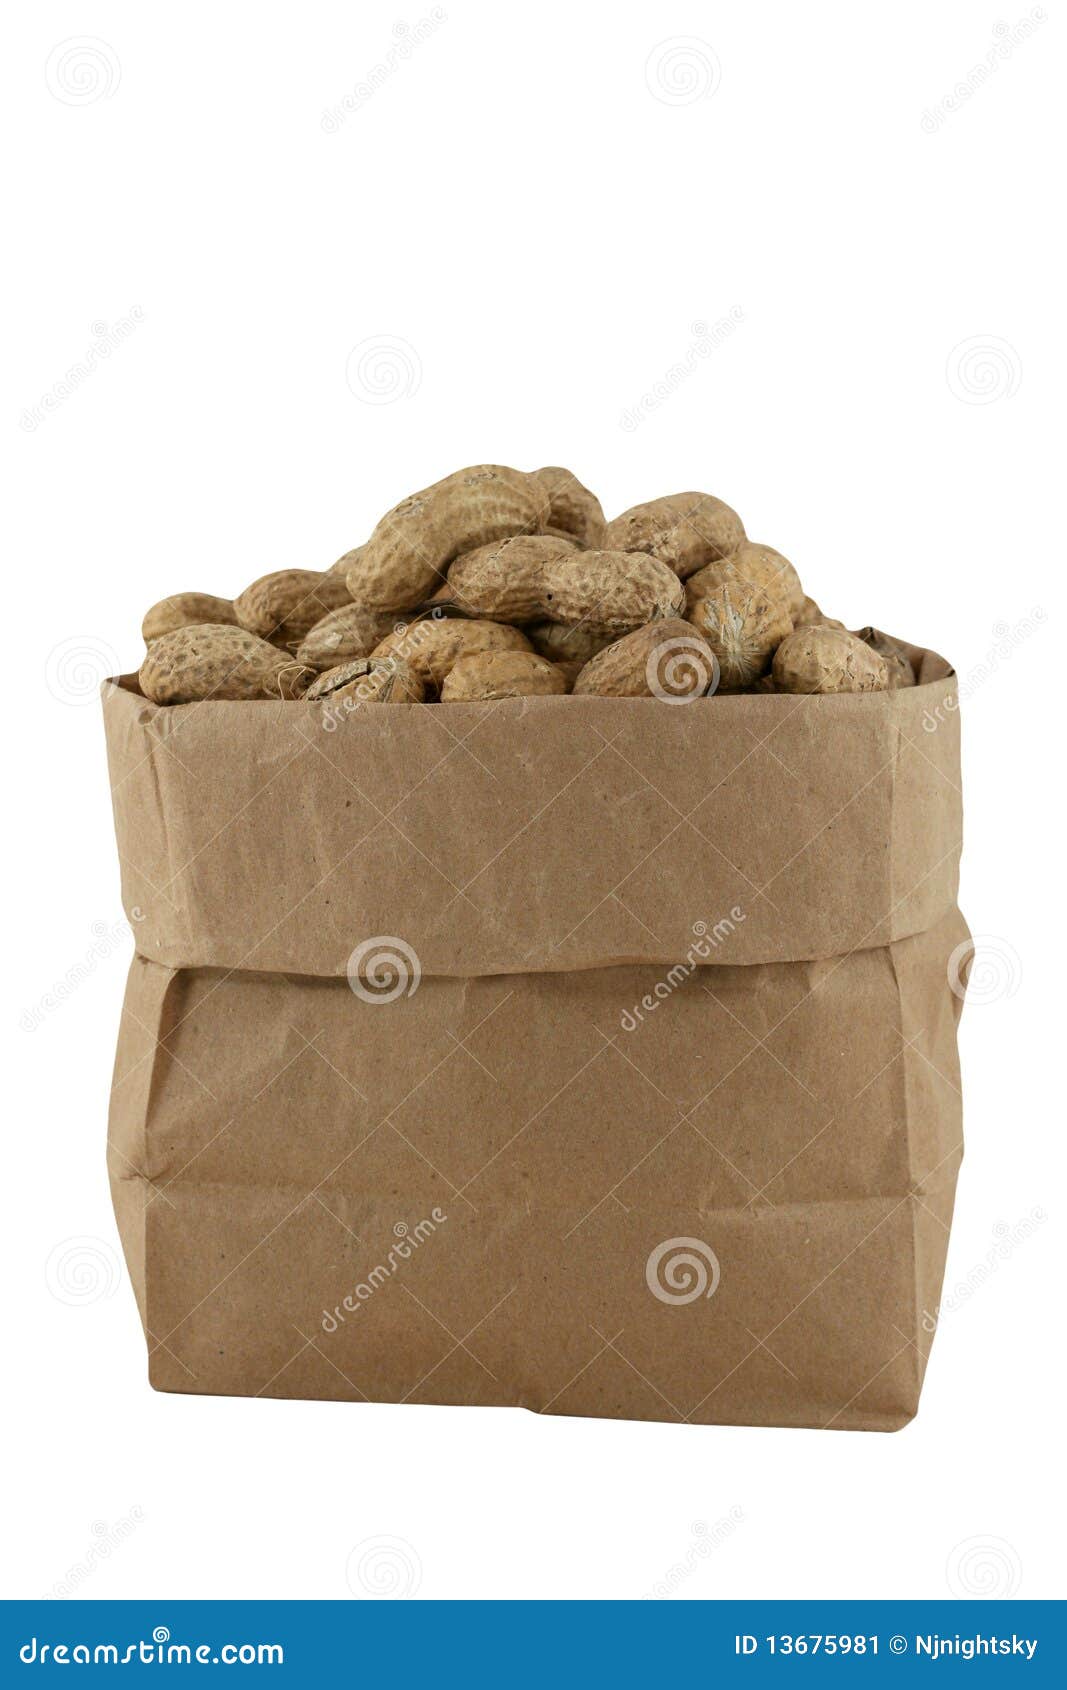 Raw Peanuts a superfood, versatile and healthy.